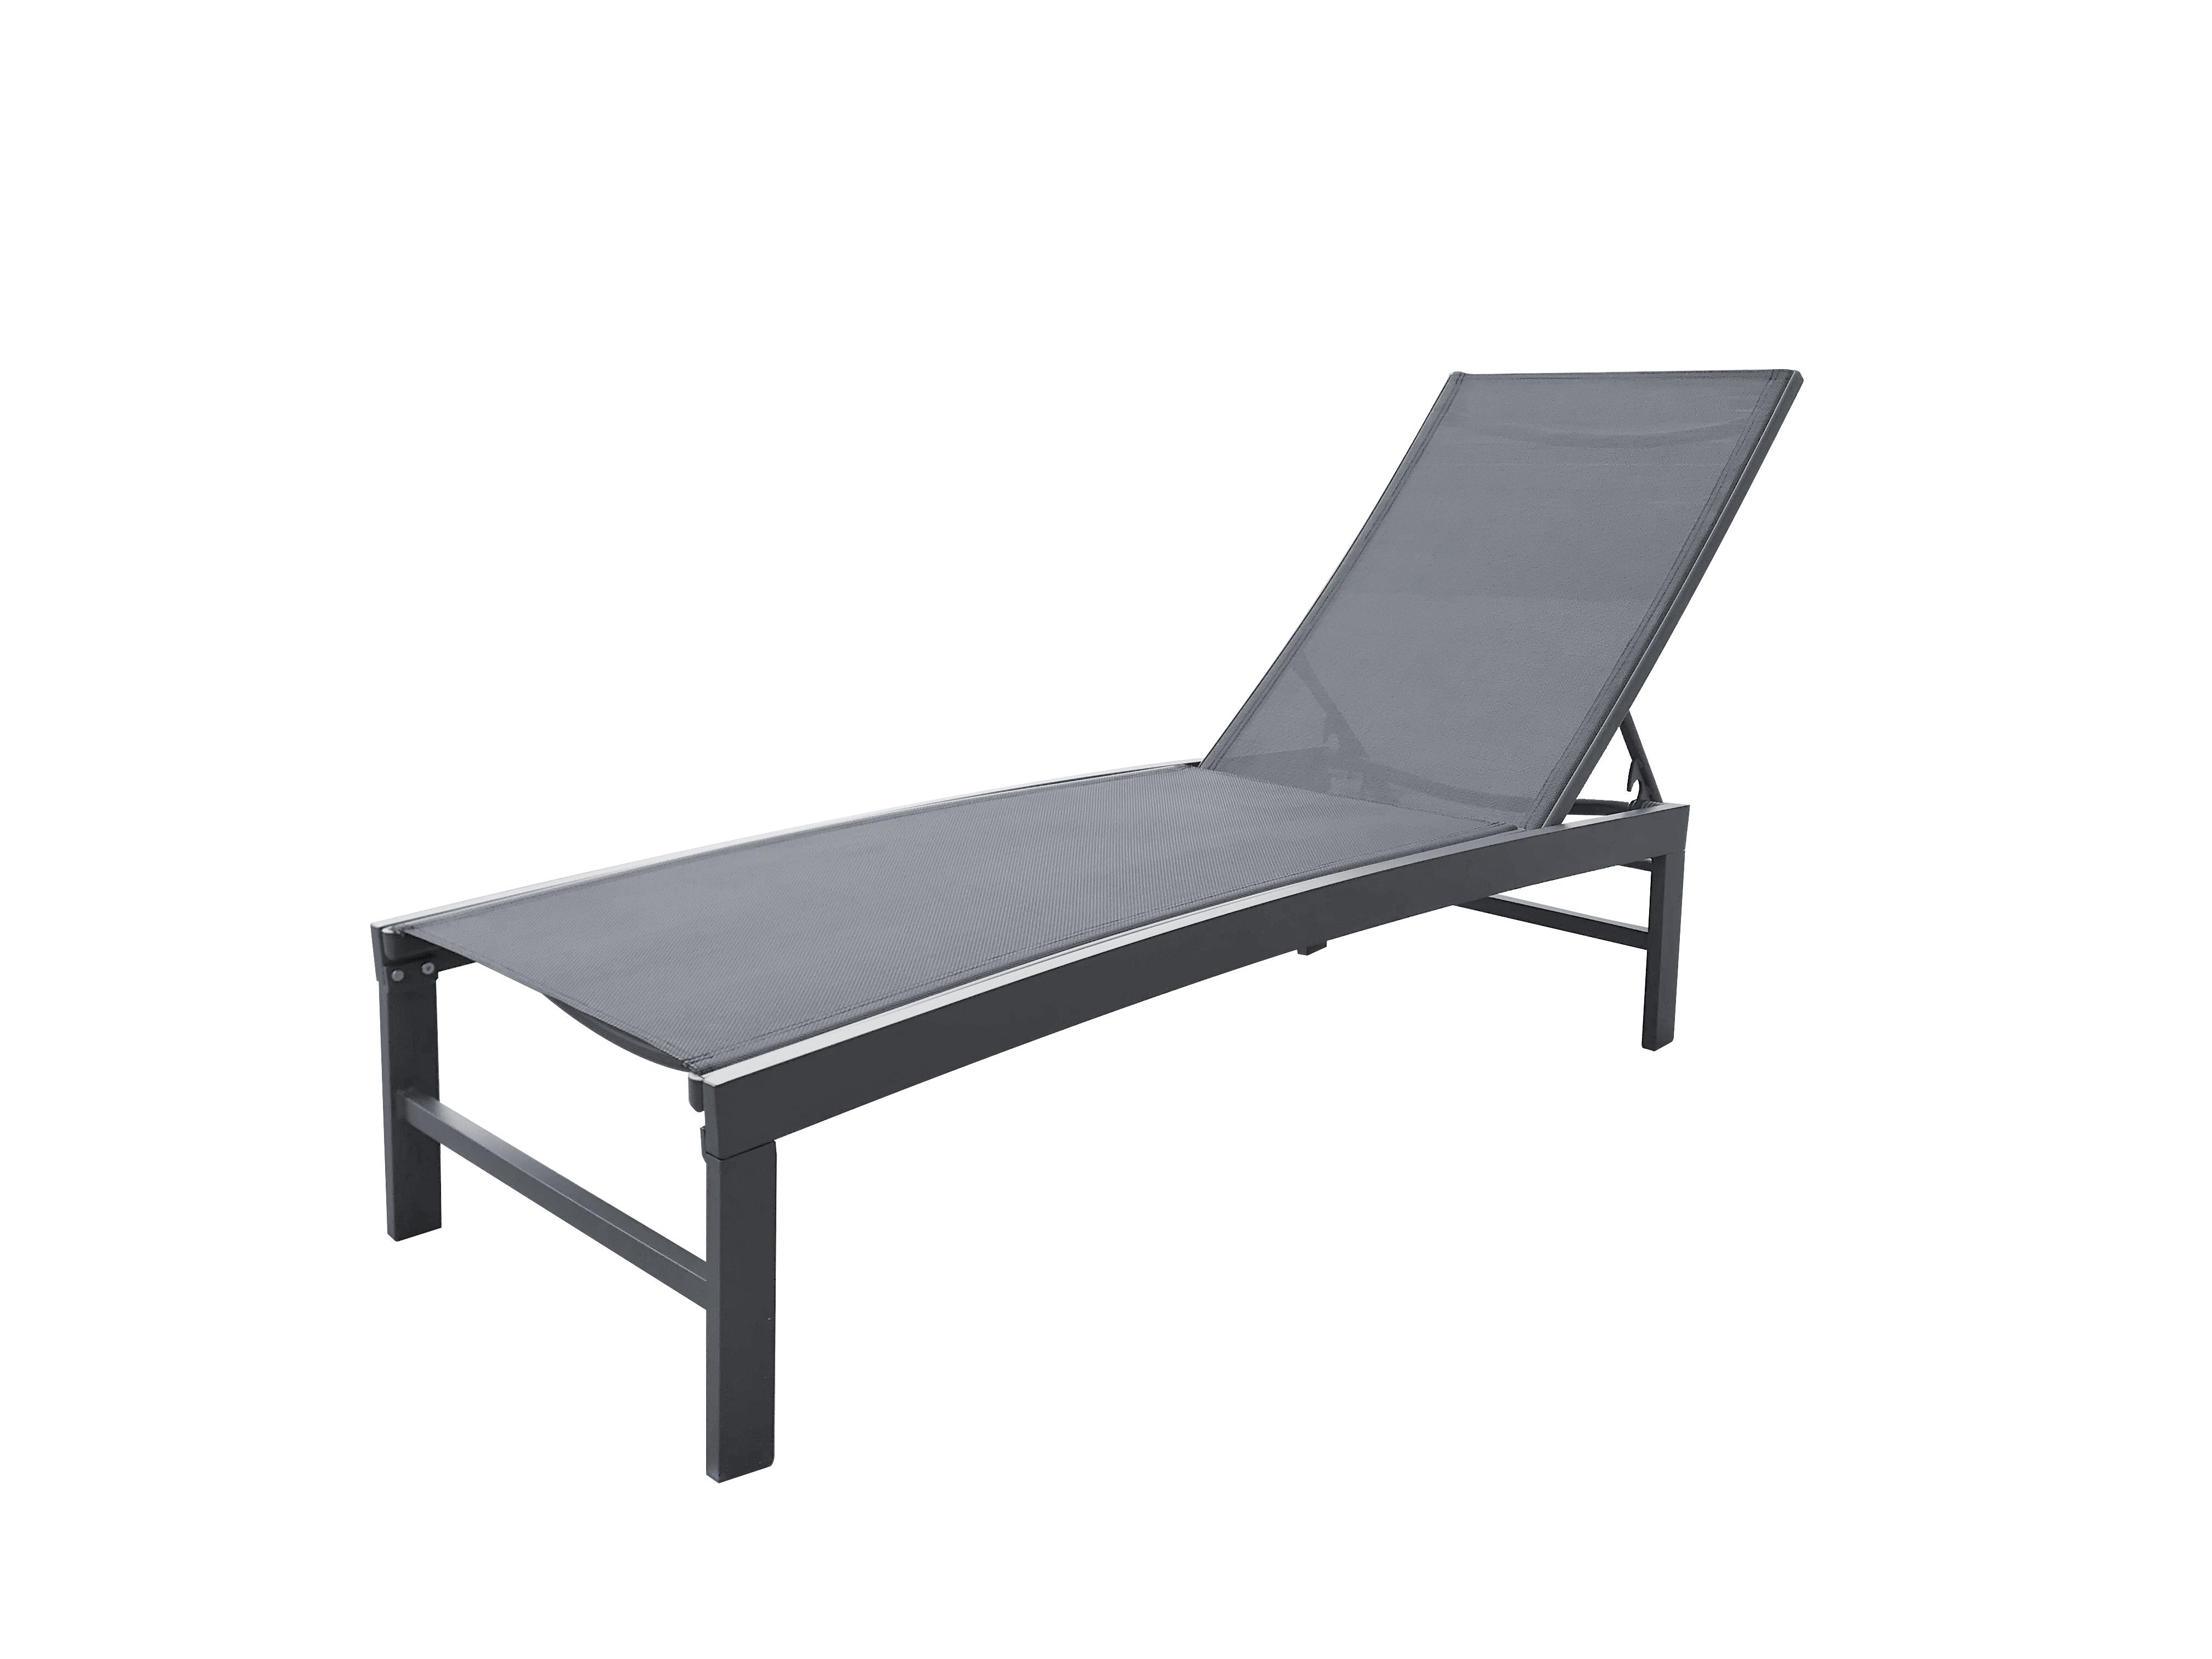 PatioZone Lie-Flat Patio Lounger with Aluminum Frame (MOSS-C29N) - Black